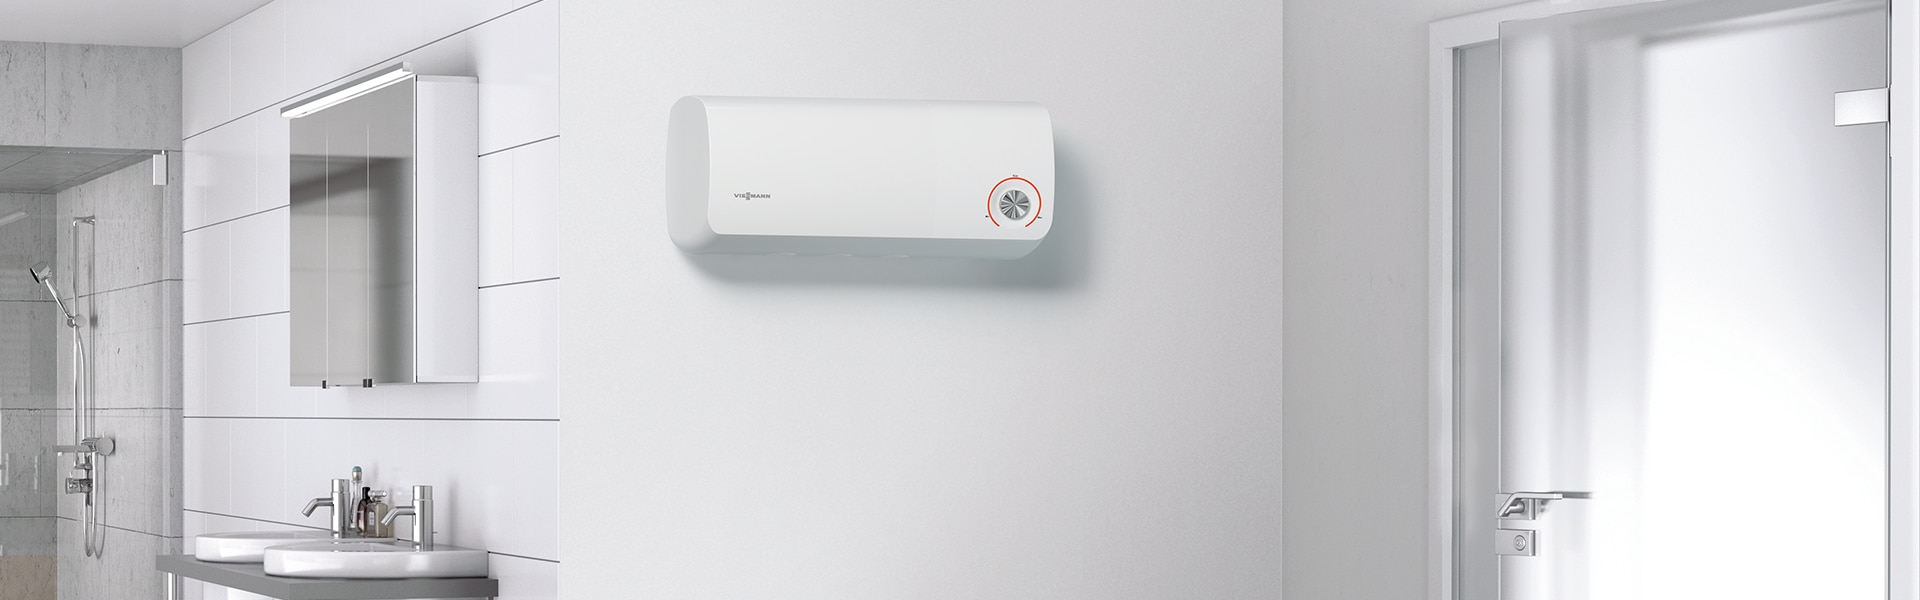 ID_residential_electric-water-heaters_10-30-l_header-image_XL.png